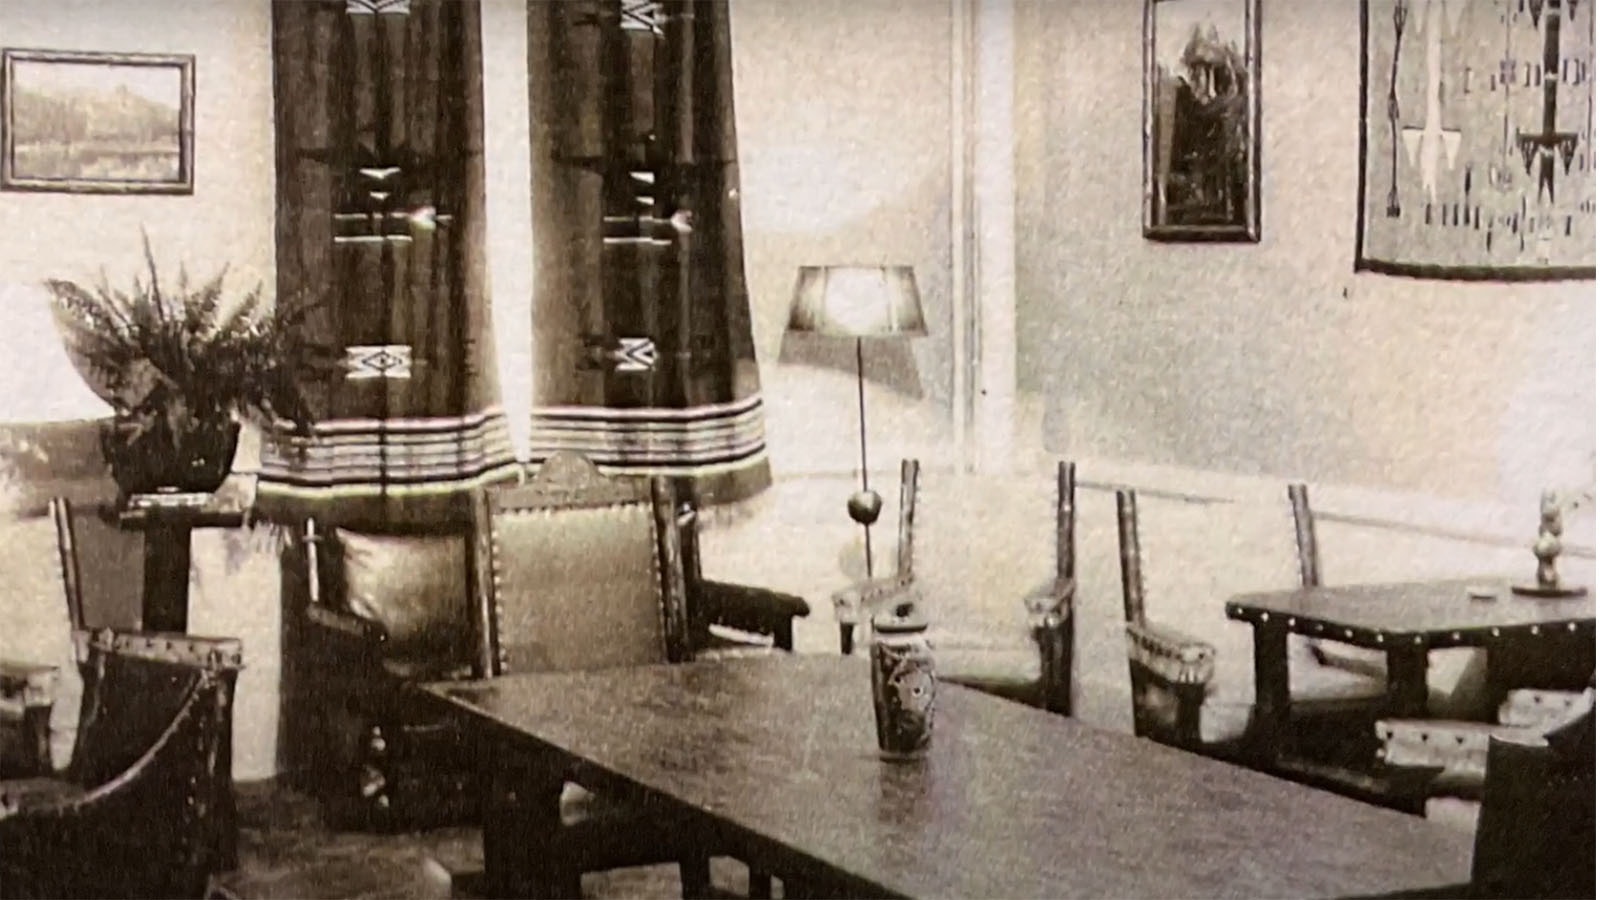 The cocktail room at the Emery Hotel in 1940.